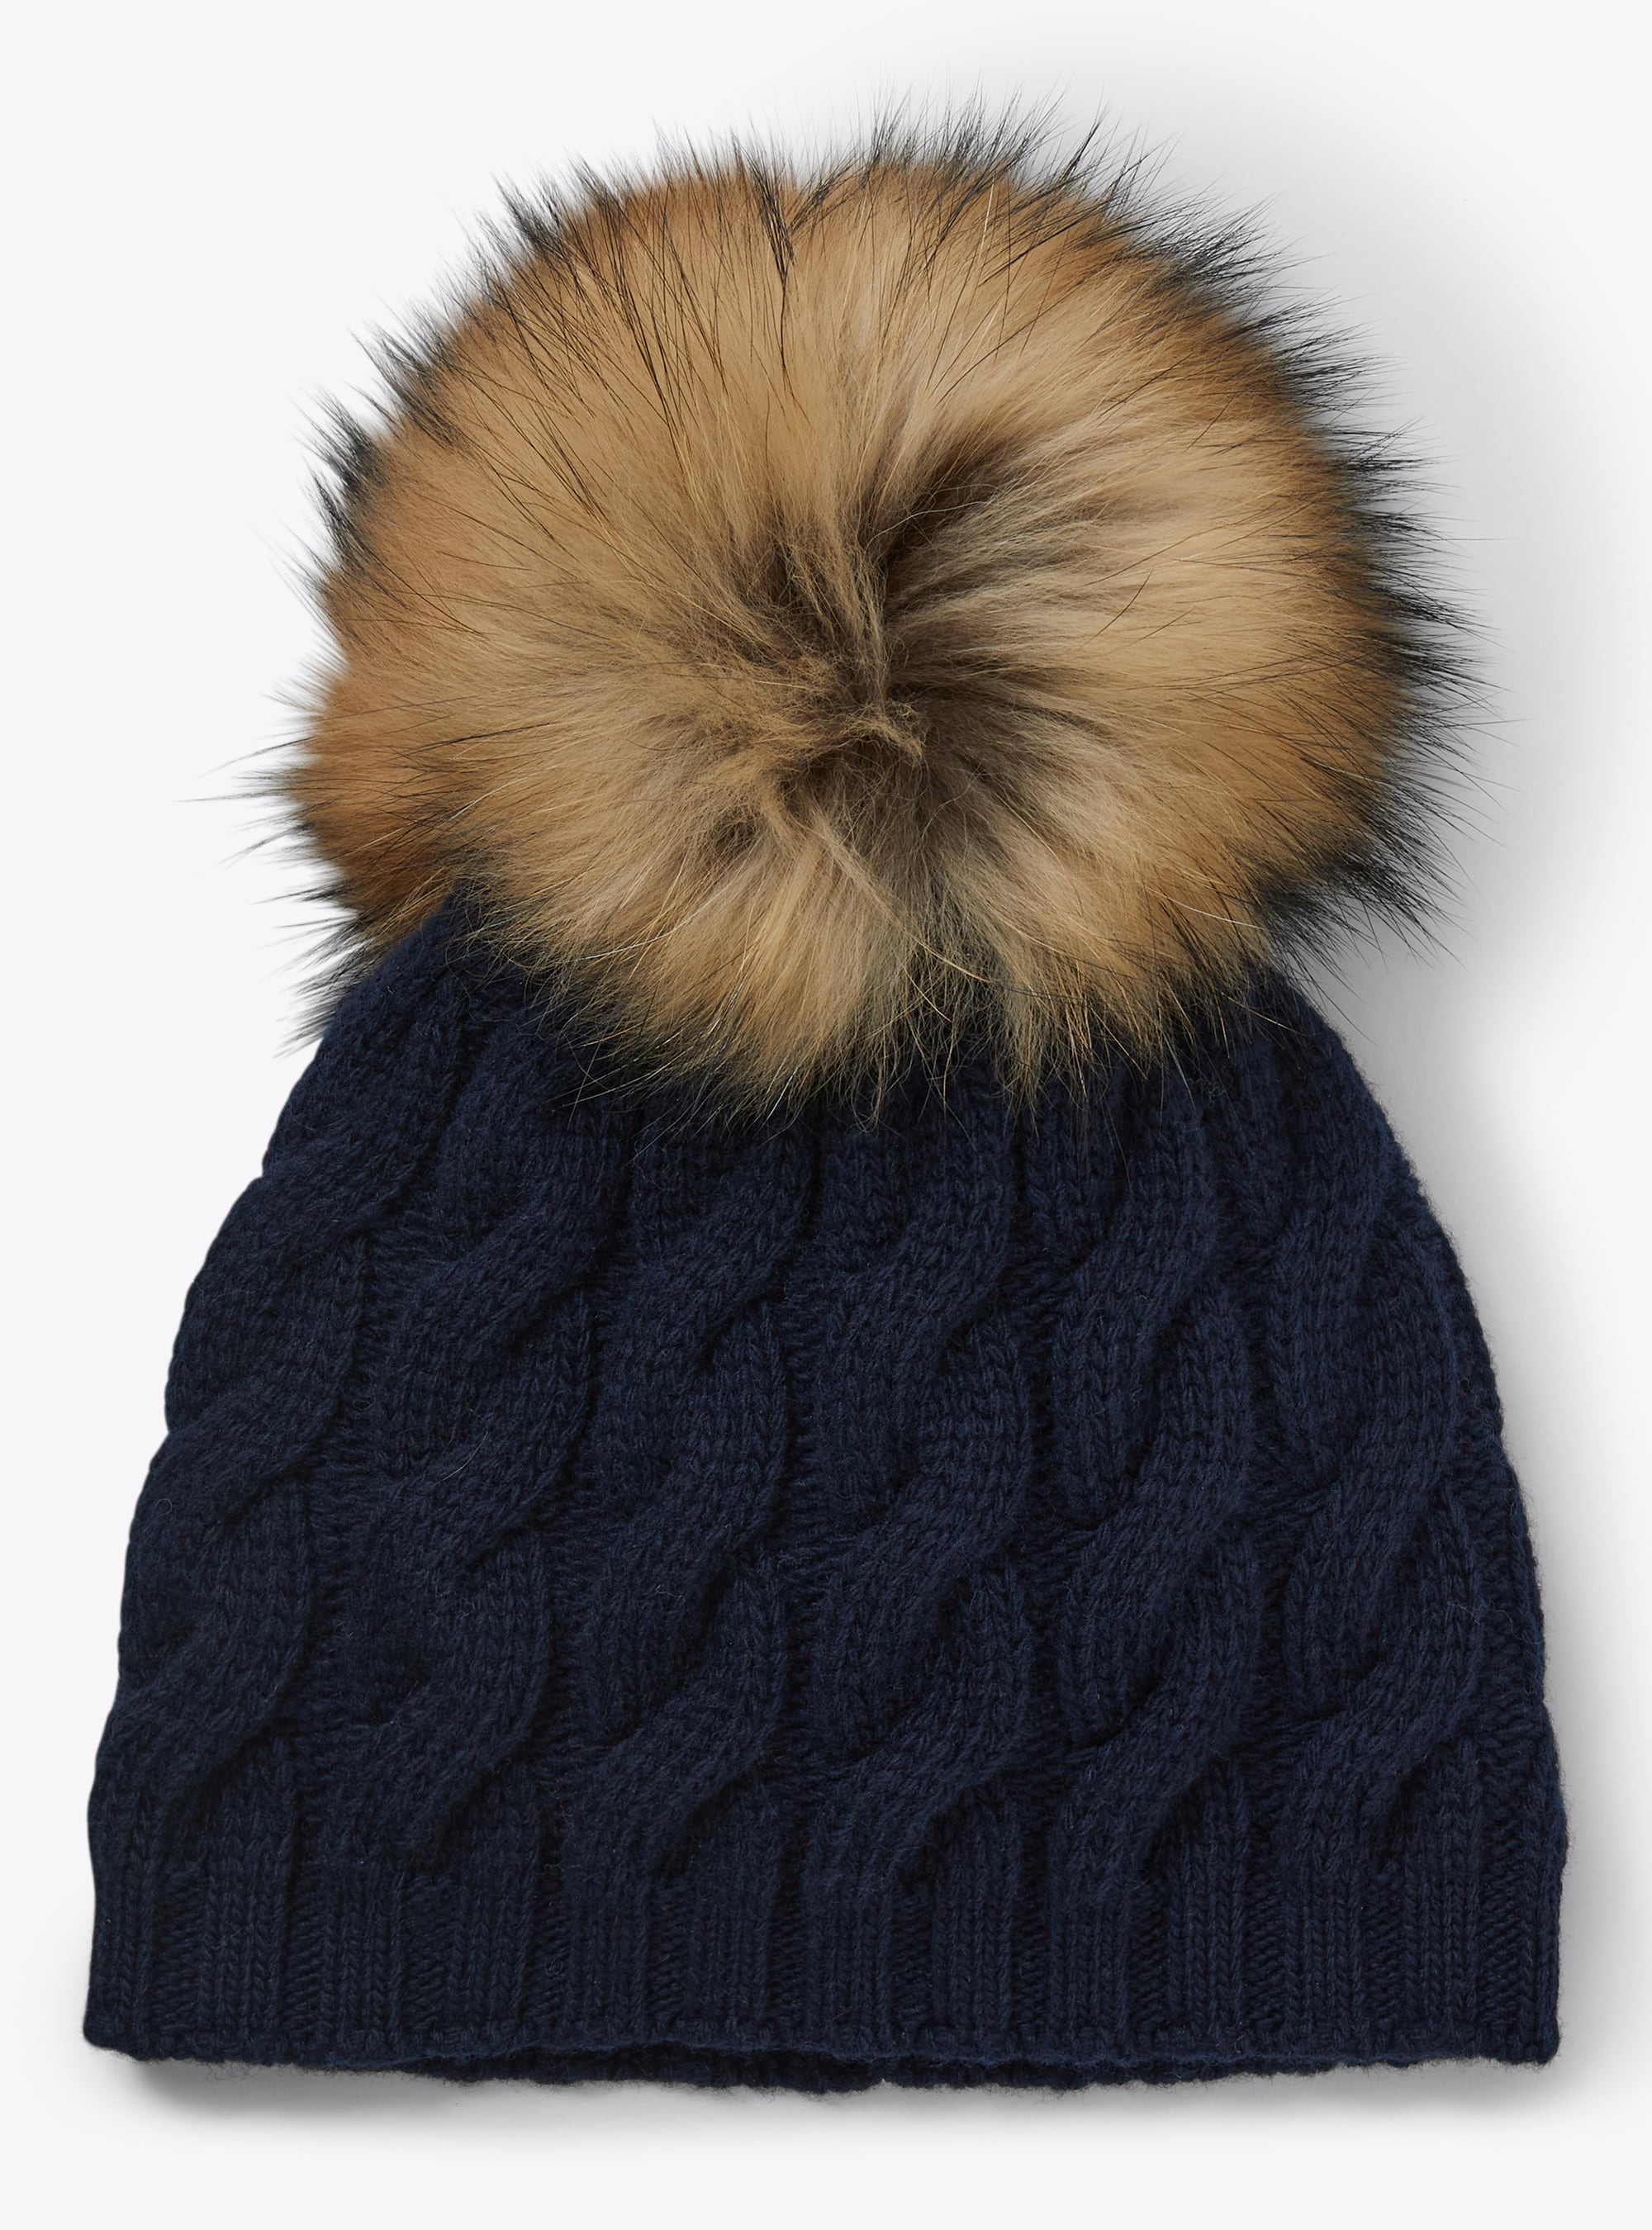 Pompom navy blue knitted hat - Accessories - Il Gufo